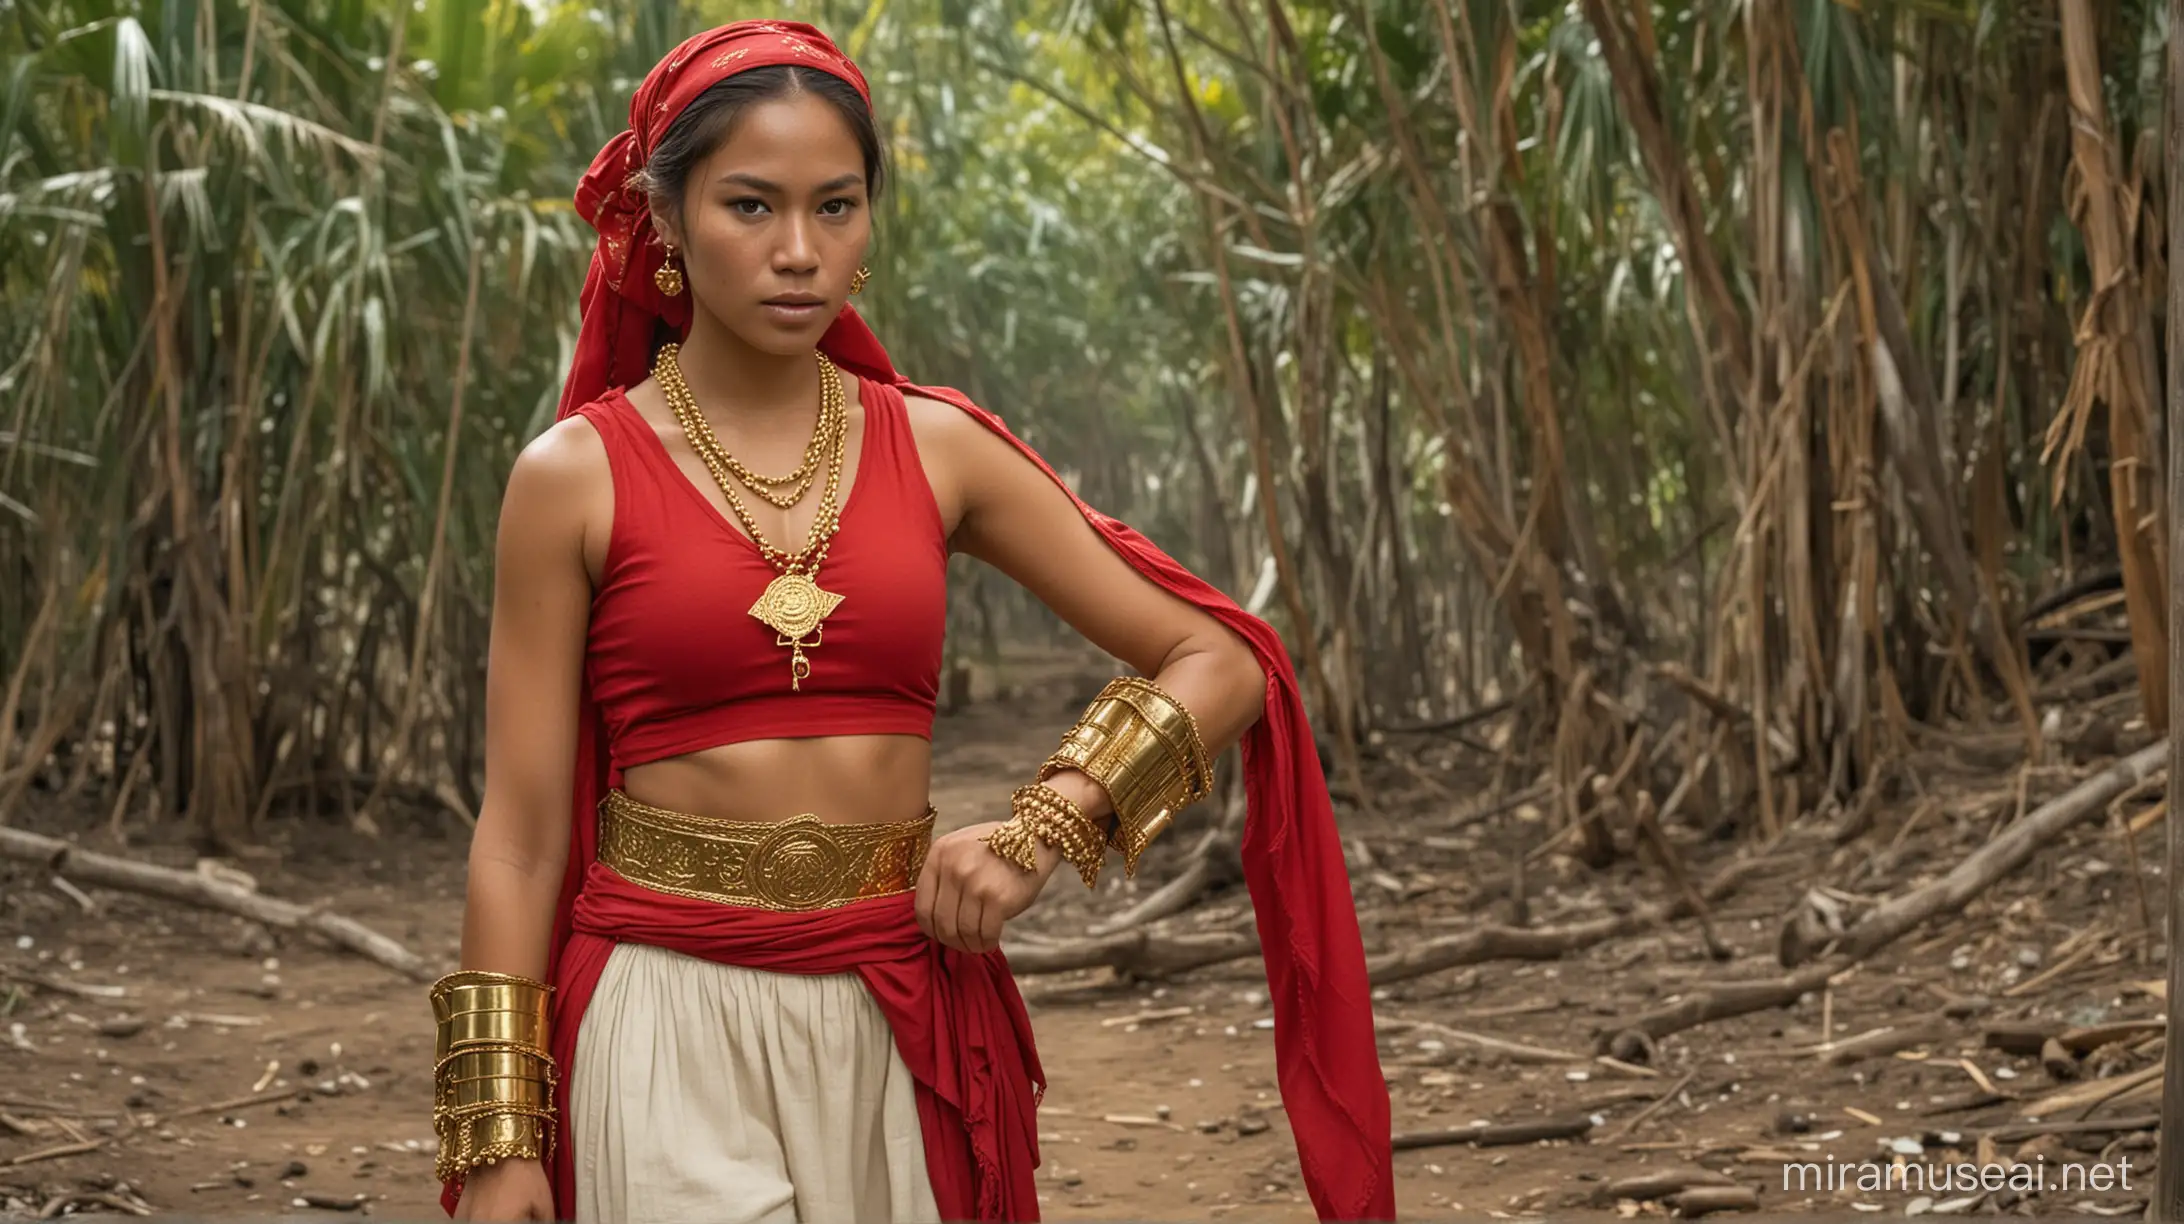 Set in the 1800s Philippines, a strong heroic dark-skinned Filipina revolutionary fighter wearing red Spanish colonial era clothing with gold rosary belt, gold bangles, and long gold necklace with a winged medallion pendant, she wears a red and gold bandana tied at the front over her long wavy hair, her footwear is a gold wooden sandals with gold straps up to her knee, she defends the poor abused natives against the Spaniards, cinematic